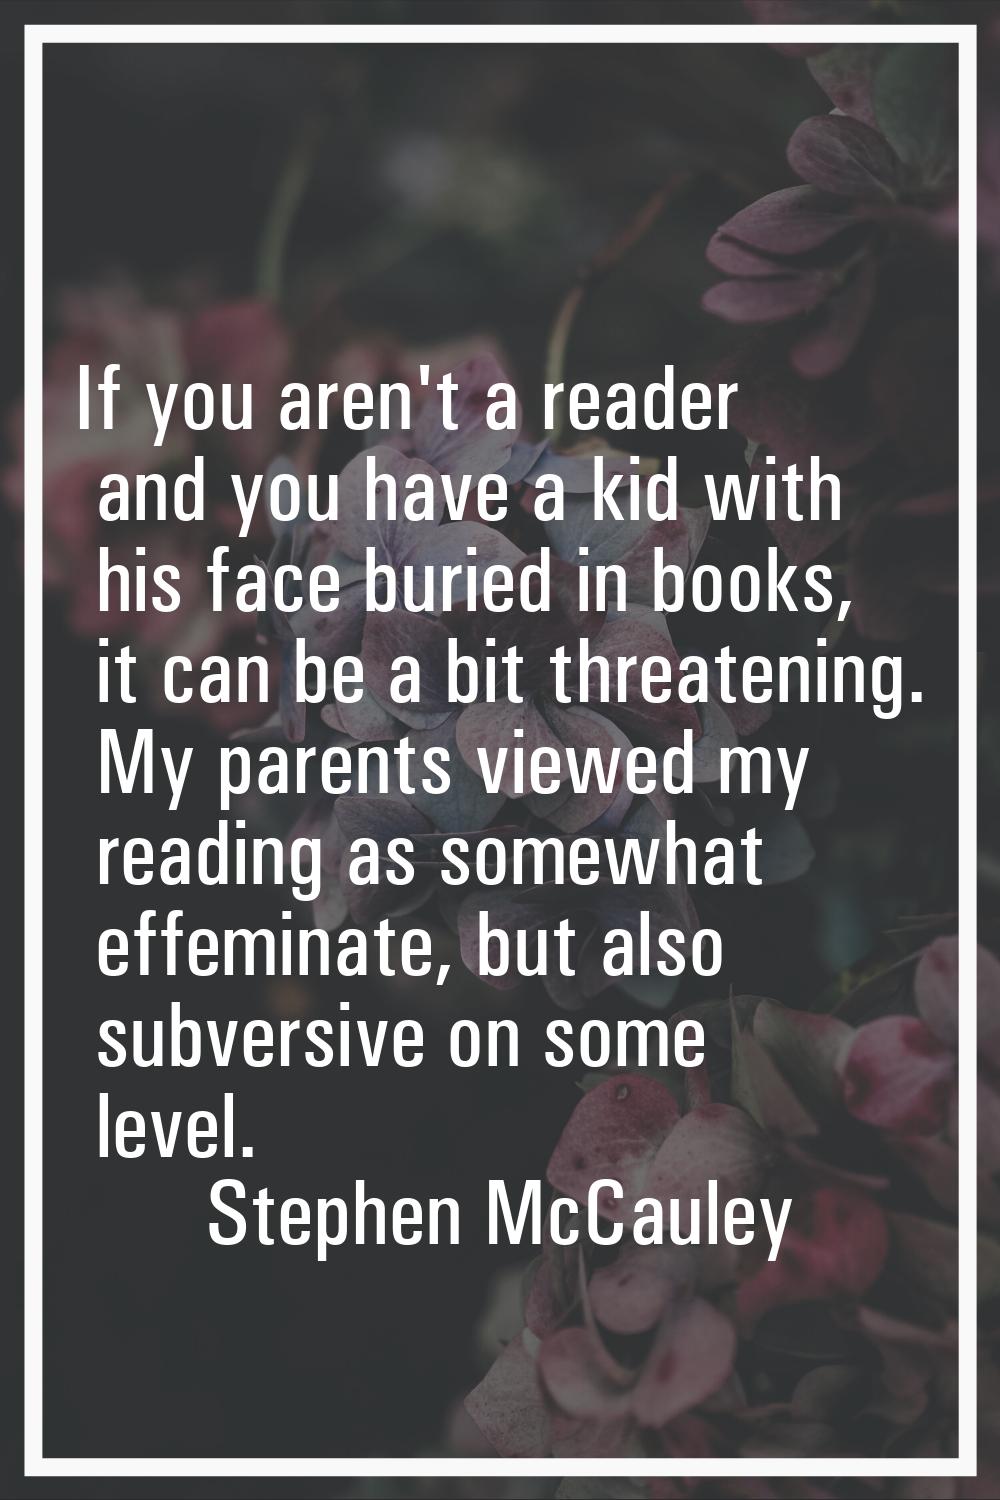 If you aren't a reader and you have a kid with his face buried in books, it can be a bit threatenin